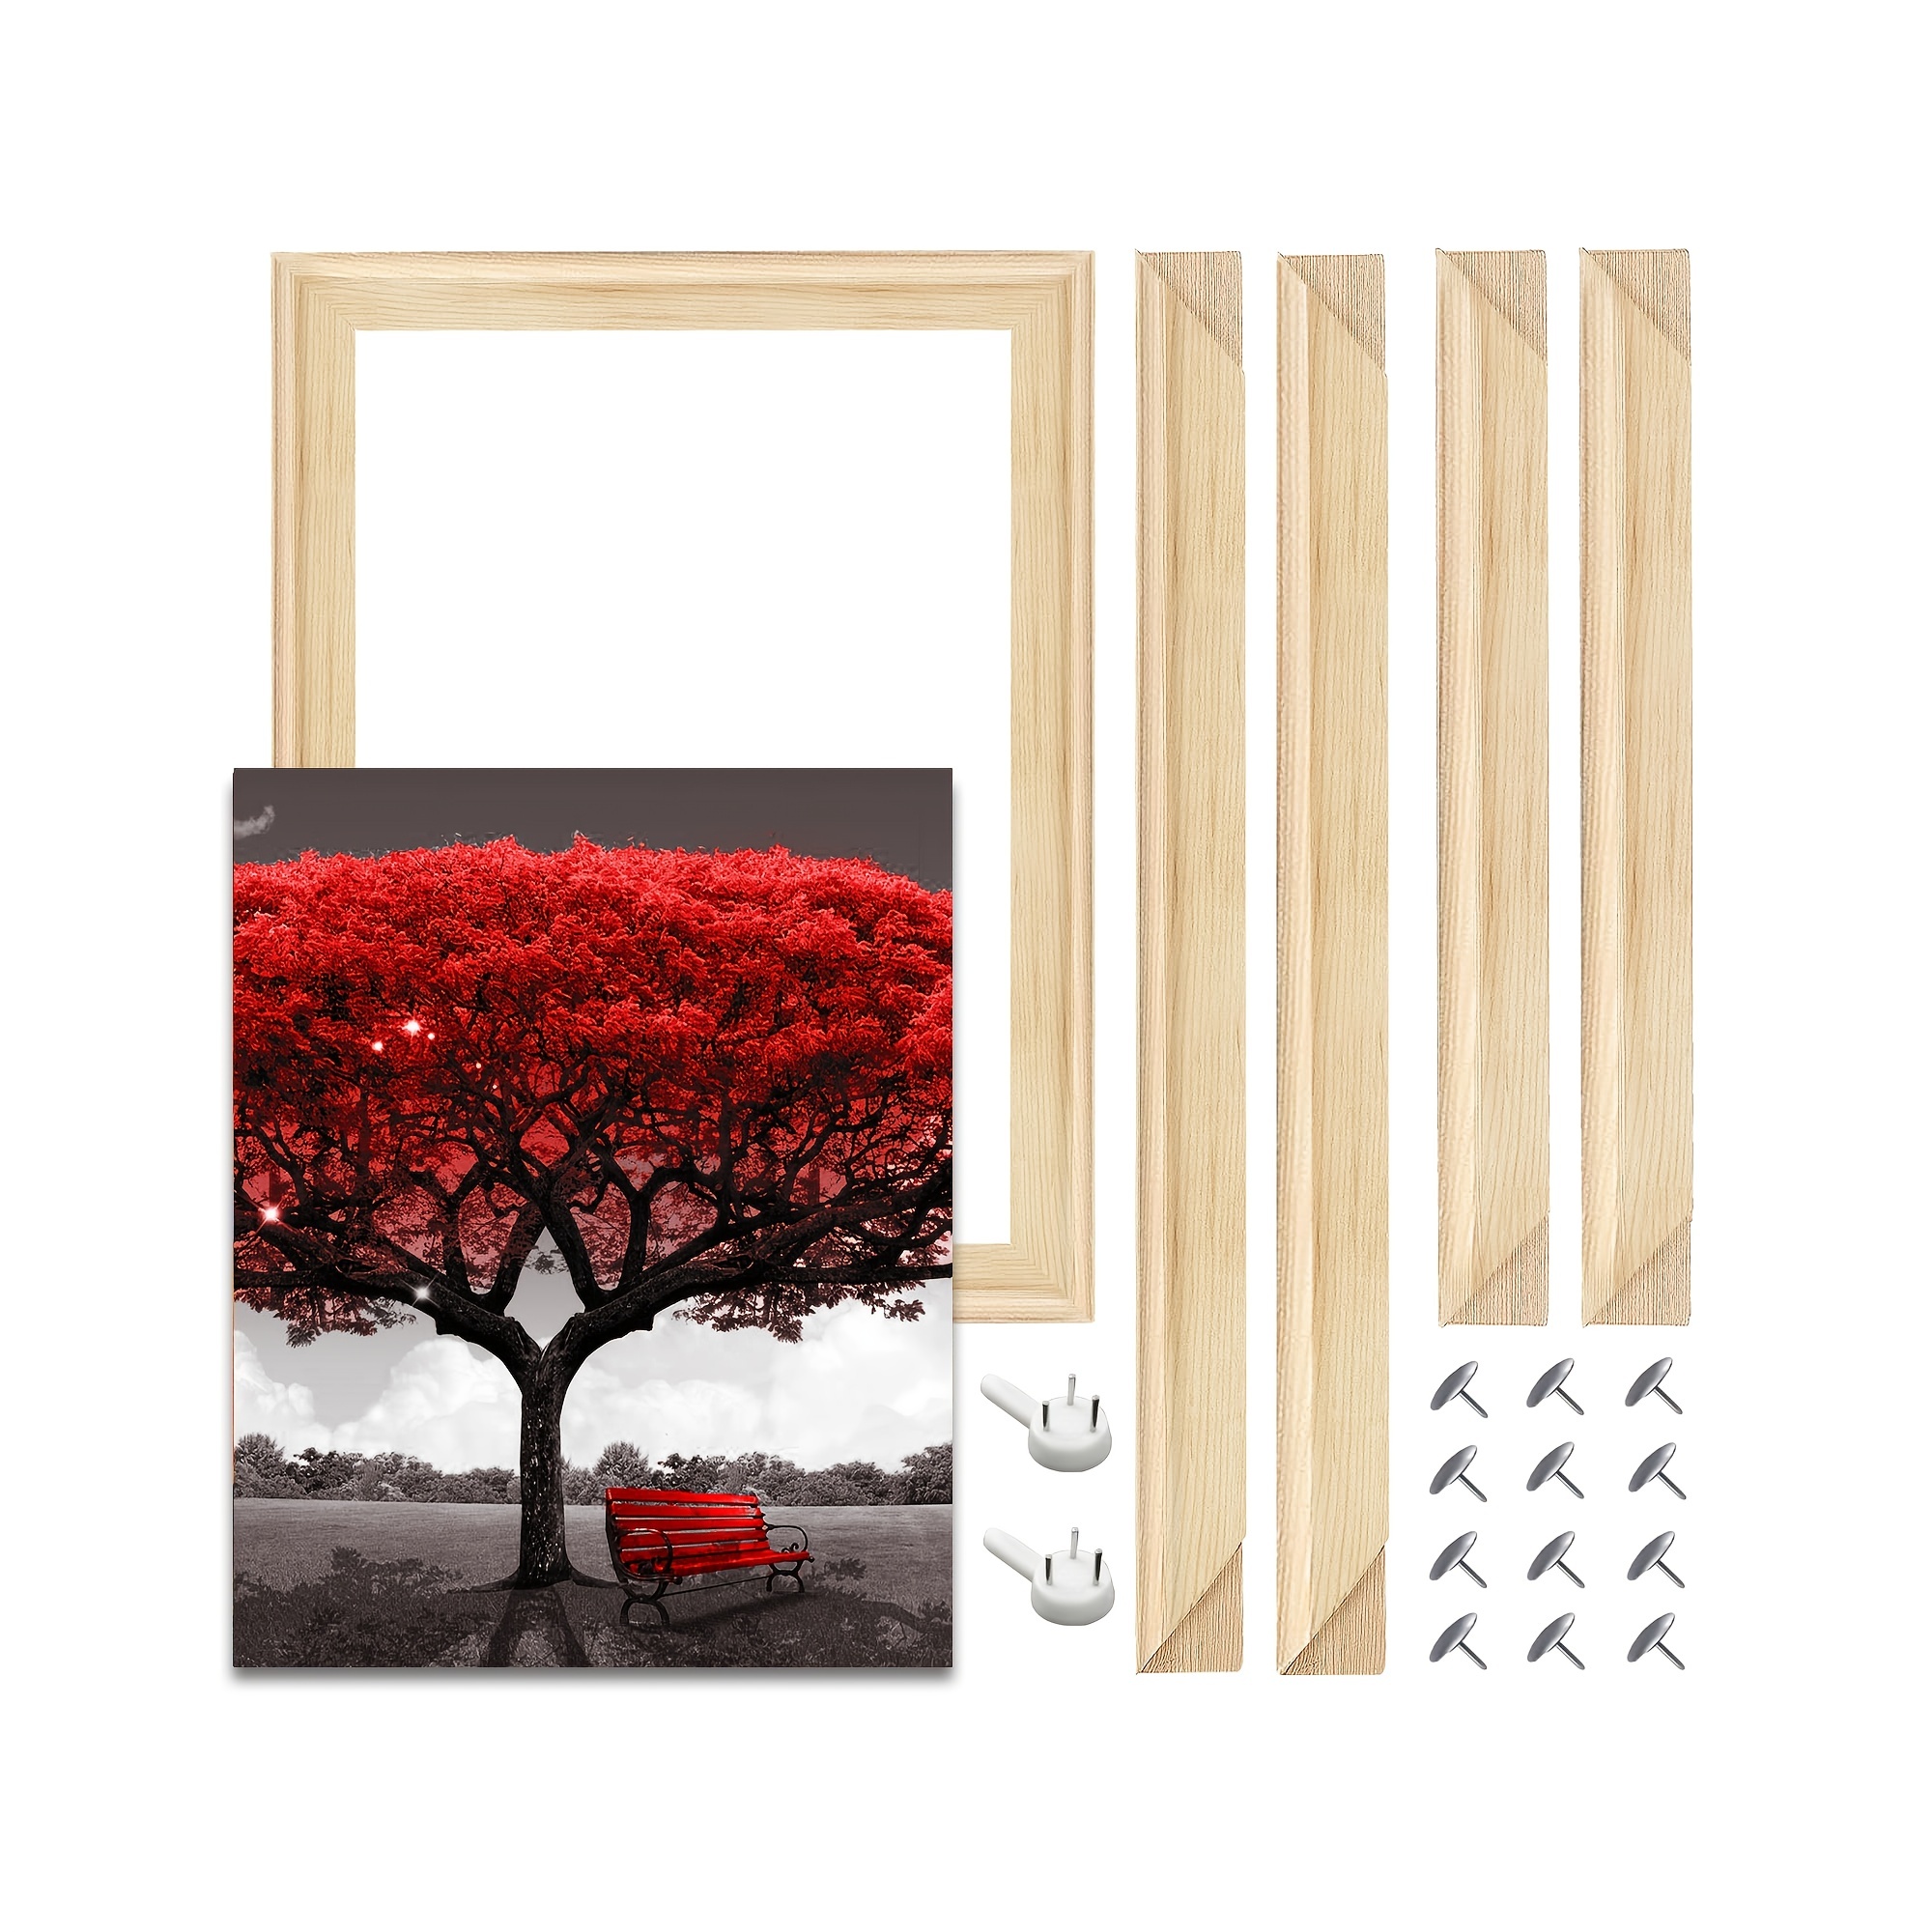 Canvas Frame Kit 12x16 Inch Stretcher Bar for Oil Painting & Wall